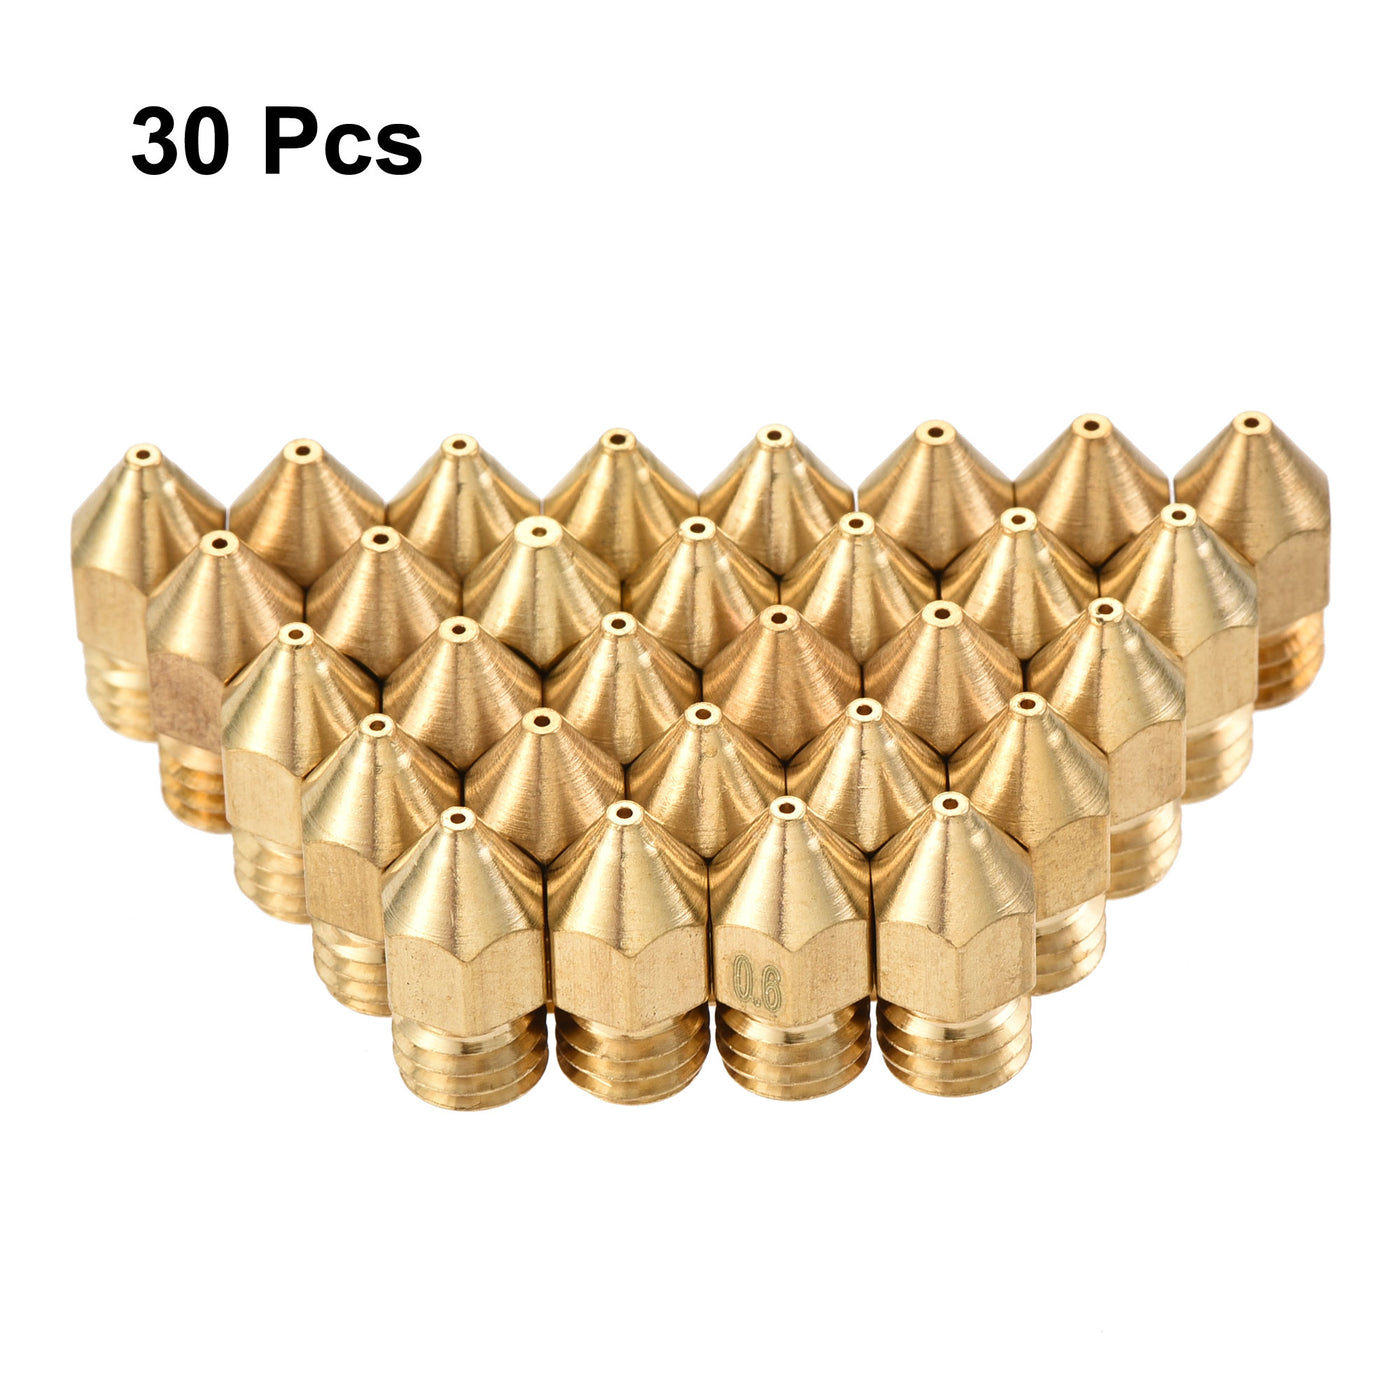 uxcell Uxcell 0.6mm 3D Printer Nozzle, 30pcs M6 Thread for MK8 1.75mm Extruder Print, Brass